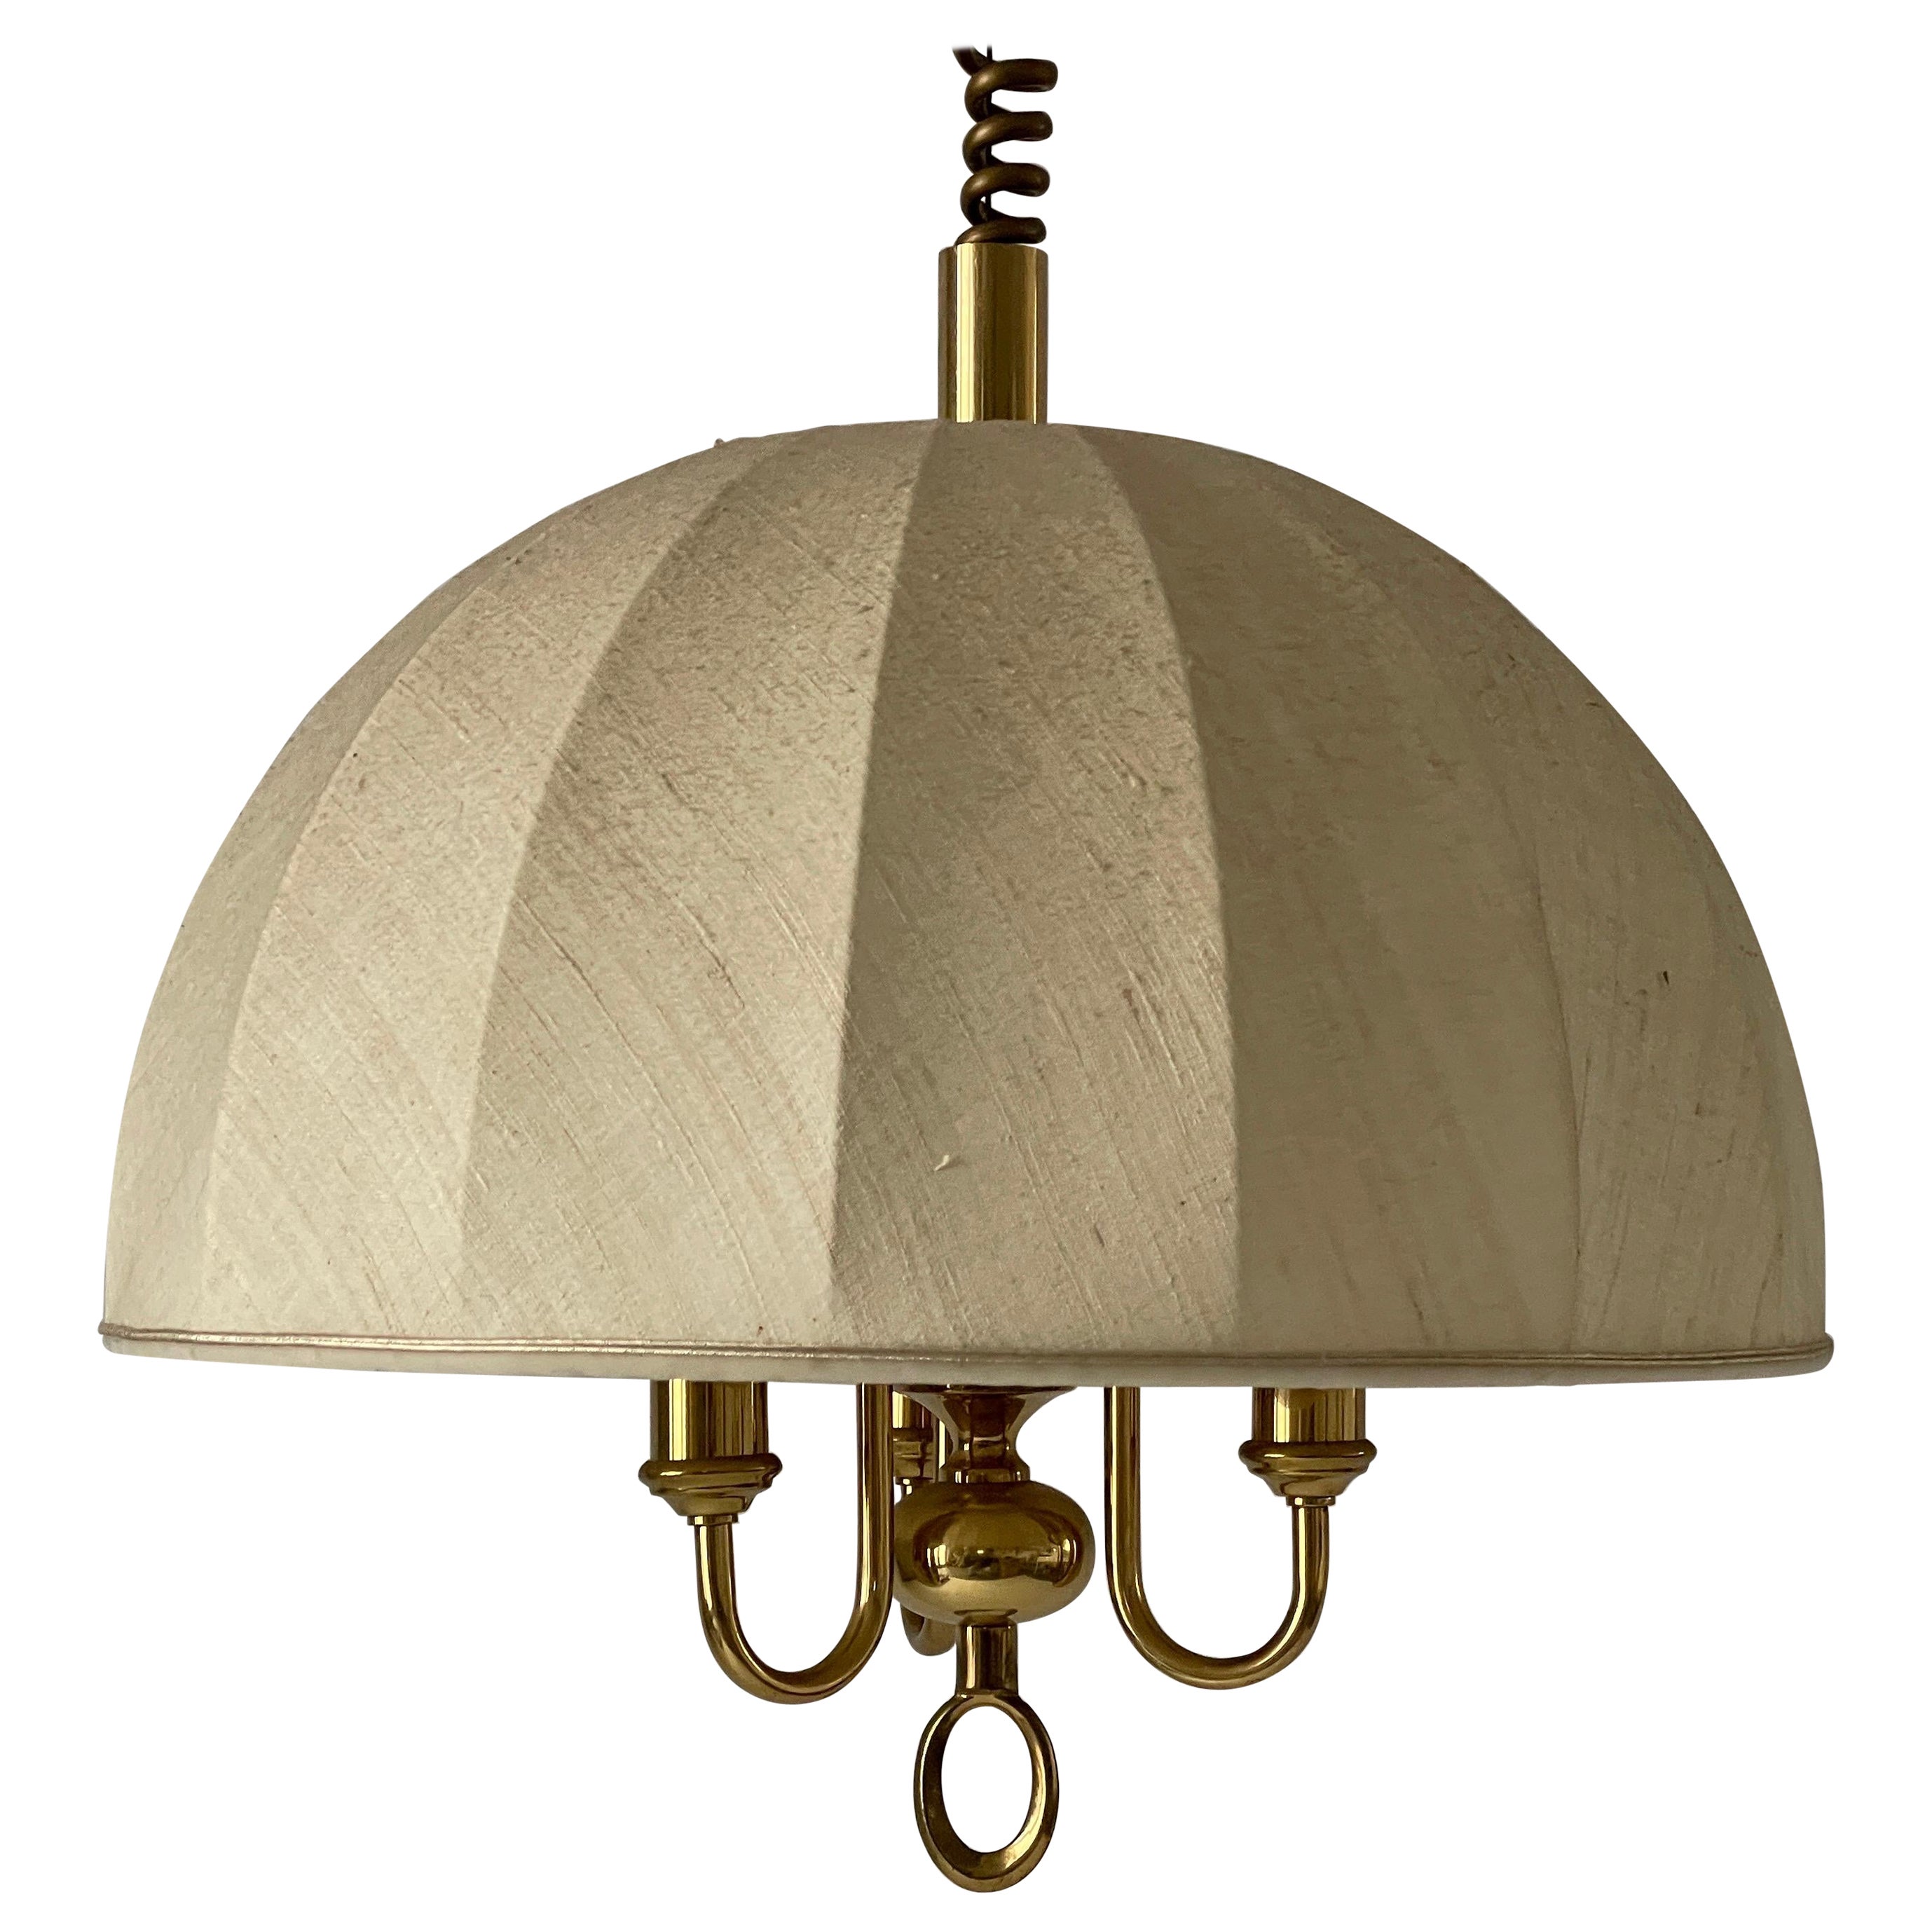 Fabric and Brass 3 socket Adjustable Shade Pendant Lamp by WKR, 1970s, Germany For Sale